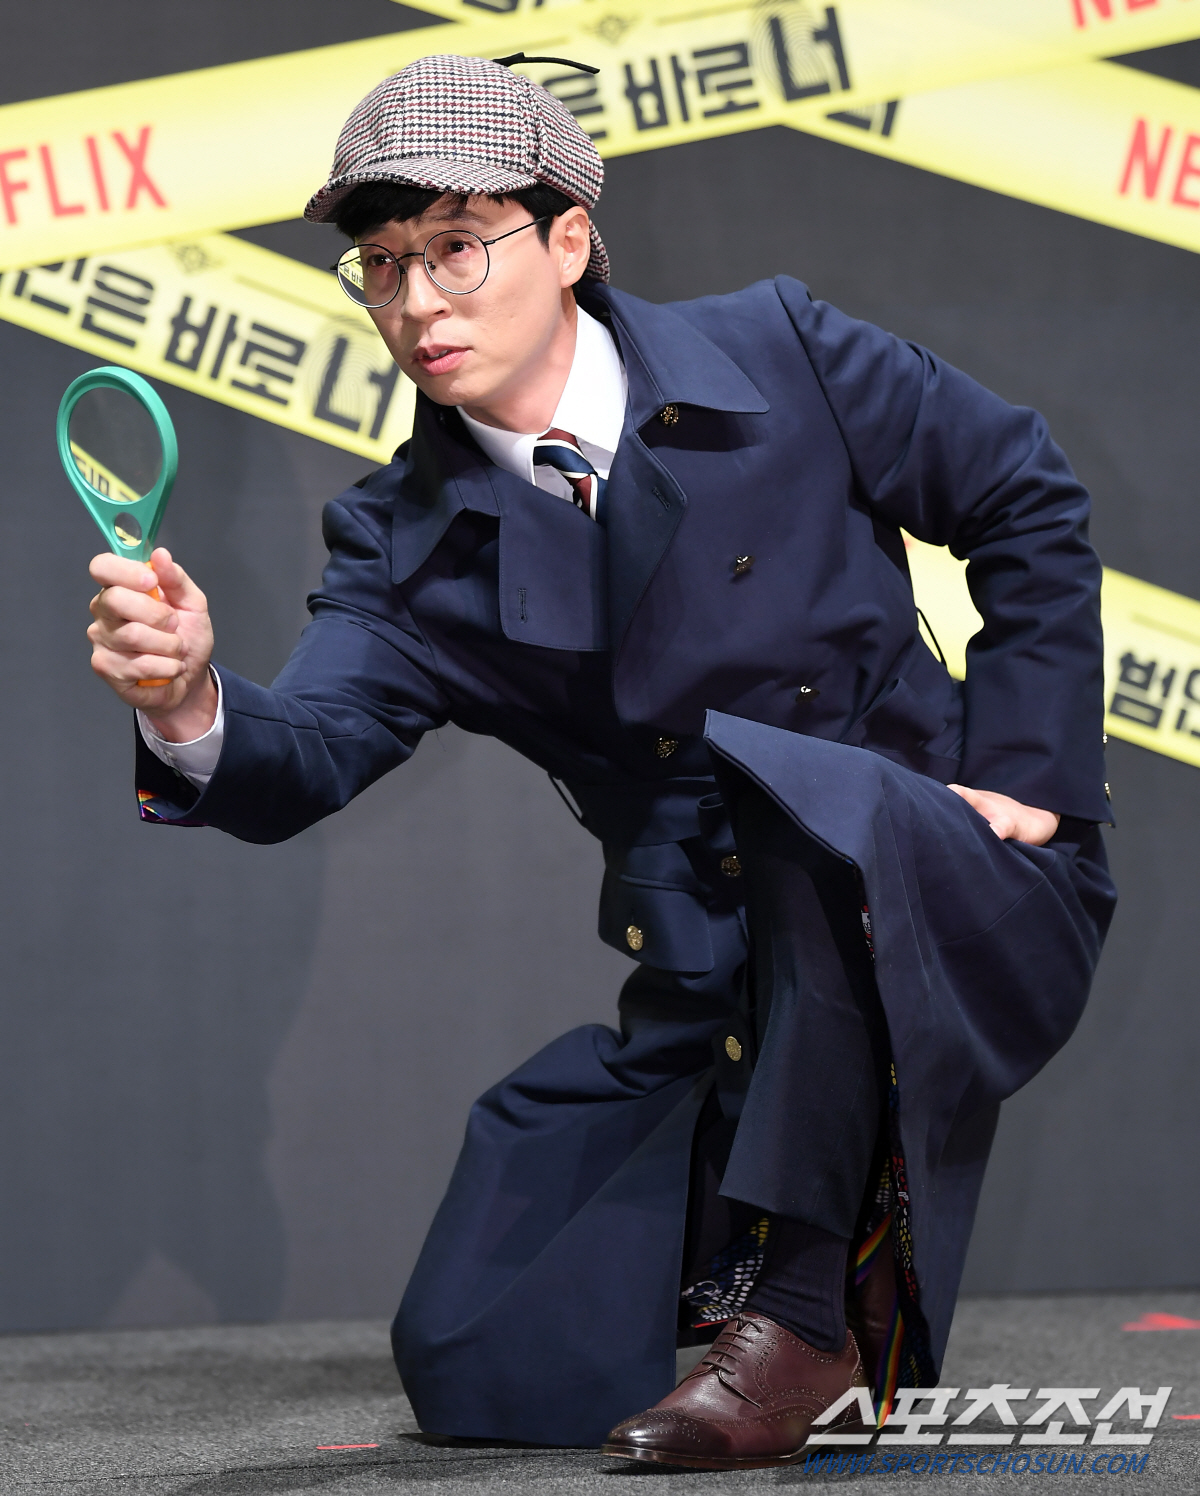 Broadcaster Yoo Jae-Suk reveals the difference between Bumbaner 2On the morning of the 8th, the production presentation of Netflixs original Youre the Whole (hereinafter referred to as Bumbaner 2 was held at CGV in Apgujeong, Gangnam-gu, Seoul.The event was attended by Yoo Jae-Suk, Kim Jong-min, Lee Seung-gi, Park Min-young, Sehun, Sejeong, Cho Hyo-jin PD, Kim Joo-hyung PD and Kim Dong-jin PD.Yoo Jae-Suk said: The secrets of the characters with connections, the process of revealing new secrets coming from there, have been drawn: Mr Lee Seung-gi has come and become very good.In Season 1, Kwangsu was together and I was worried that there would be an empty place, but Seung-gi filled it perfectly. It was season 2 compared to season 1.I think it would be nice to expect the youngest line, Mr. Sehun and Mr. Sejeong, to take the surcharge. Bumbaner 2 is an entertainment program that deals with the full-fledged life variety of the Monk Dan, which is busy with hands and feet because Murder, She Wrote are busy. Guests who will shine episodes with the Monk Dan will appear and add strength to Murder, She Wrote entertainment.In addition to Yoo Jae-Suk, Kim Jong-min, Park Min-young, Sehun, and Sejeong, who have been together since last season, Lee Seung-gi will join the Monk lineup and hope to show extraordinary Murder, She Wrote ability.Bumbaner 2 has released past-class guests before the broadcast.B1A4 camp, Lim Won-hee, Kim Min-jae, Park Jin-joo, intern Monk, Jin Se-yeon, Shin A-young and Hani will join.Bumbaner 2 will be released worldwide on Netflix on Saturday.